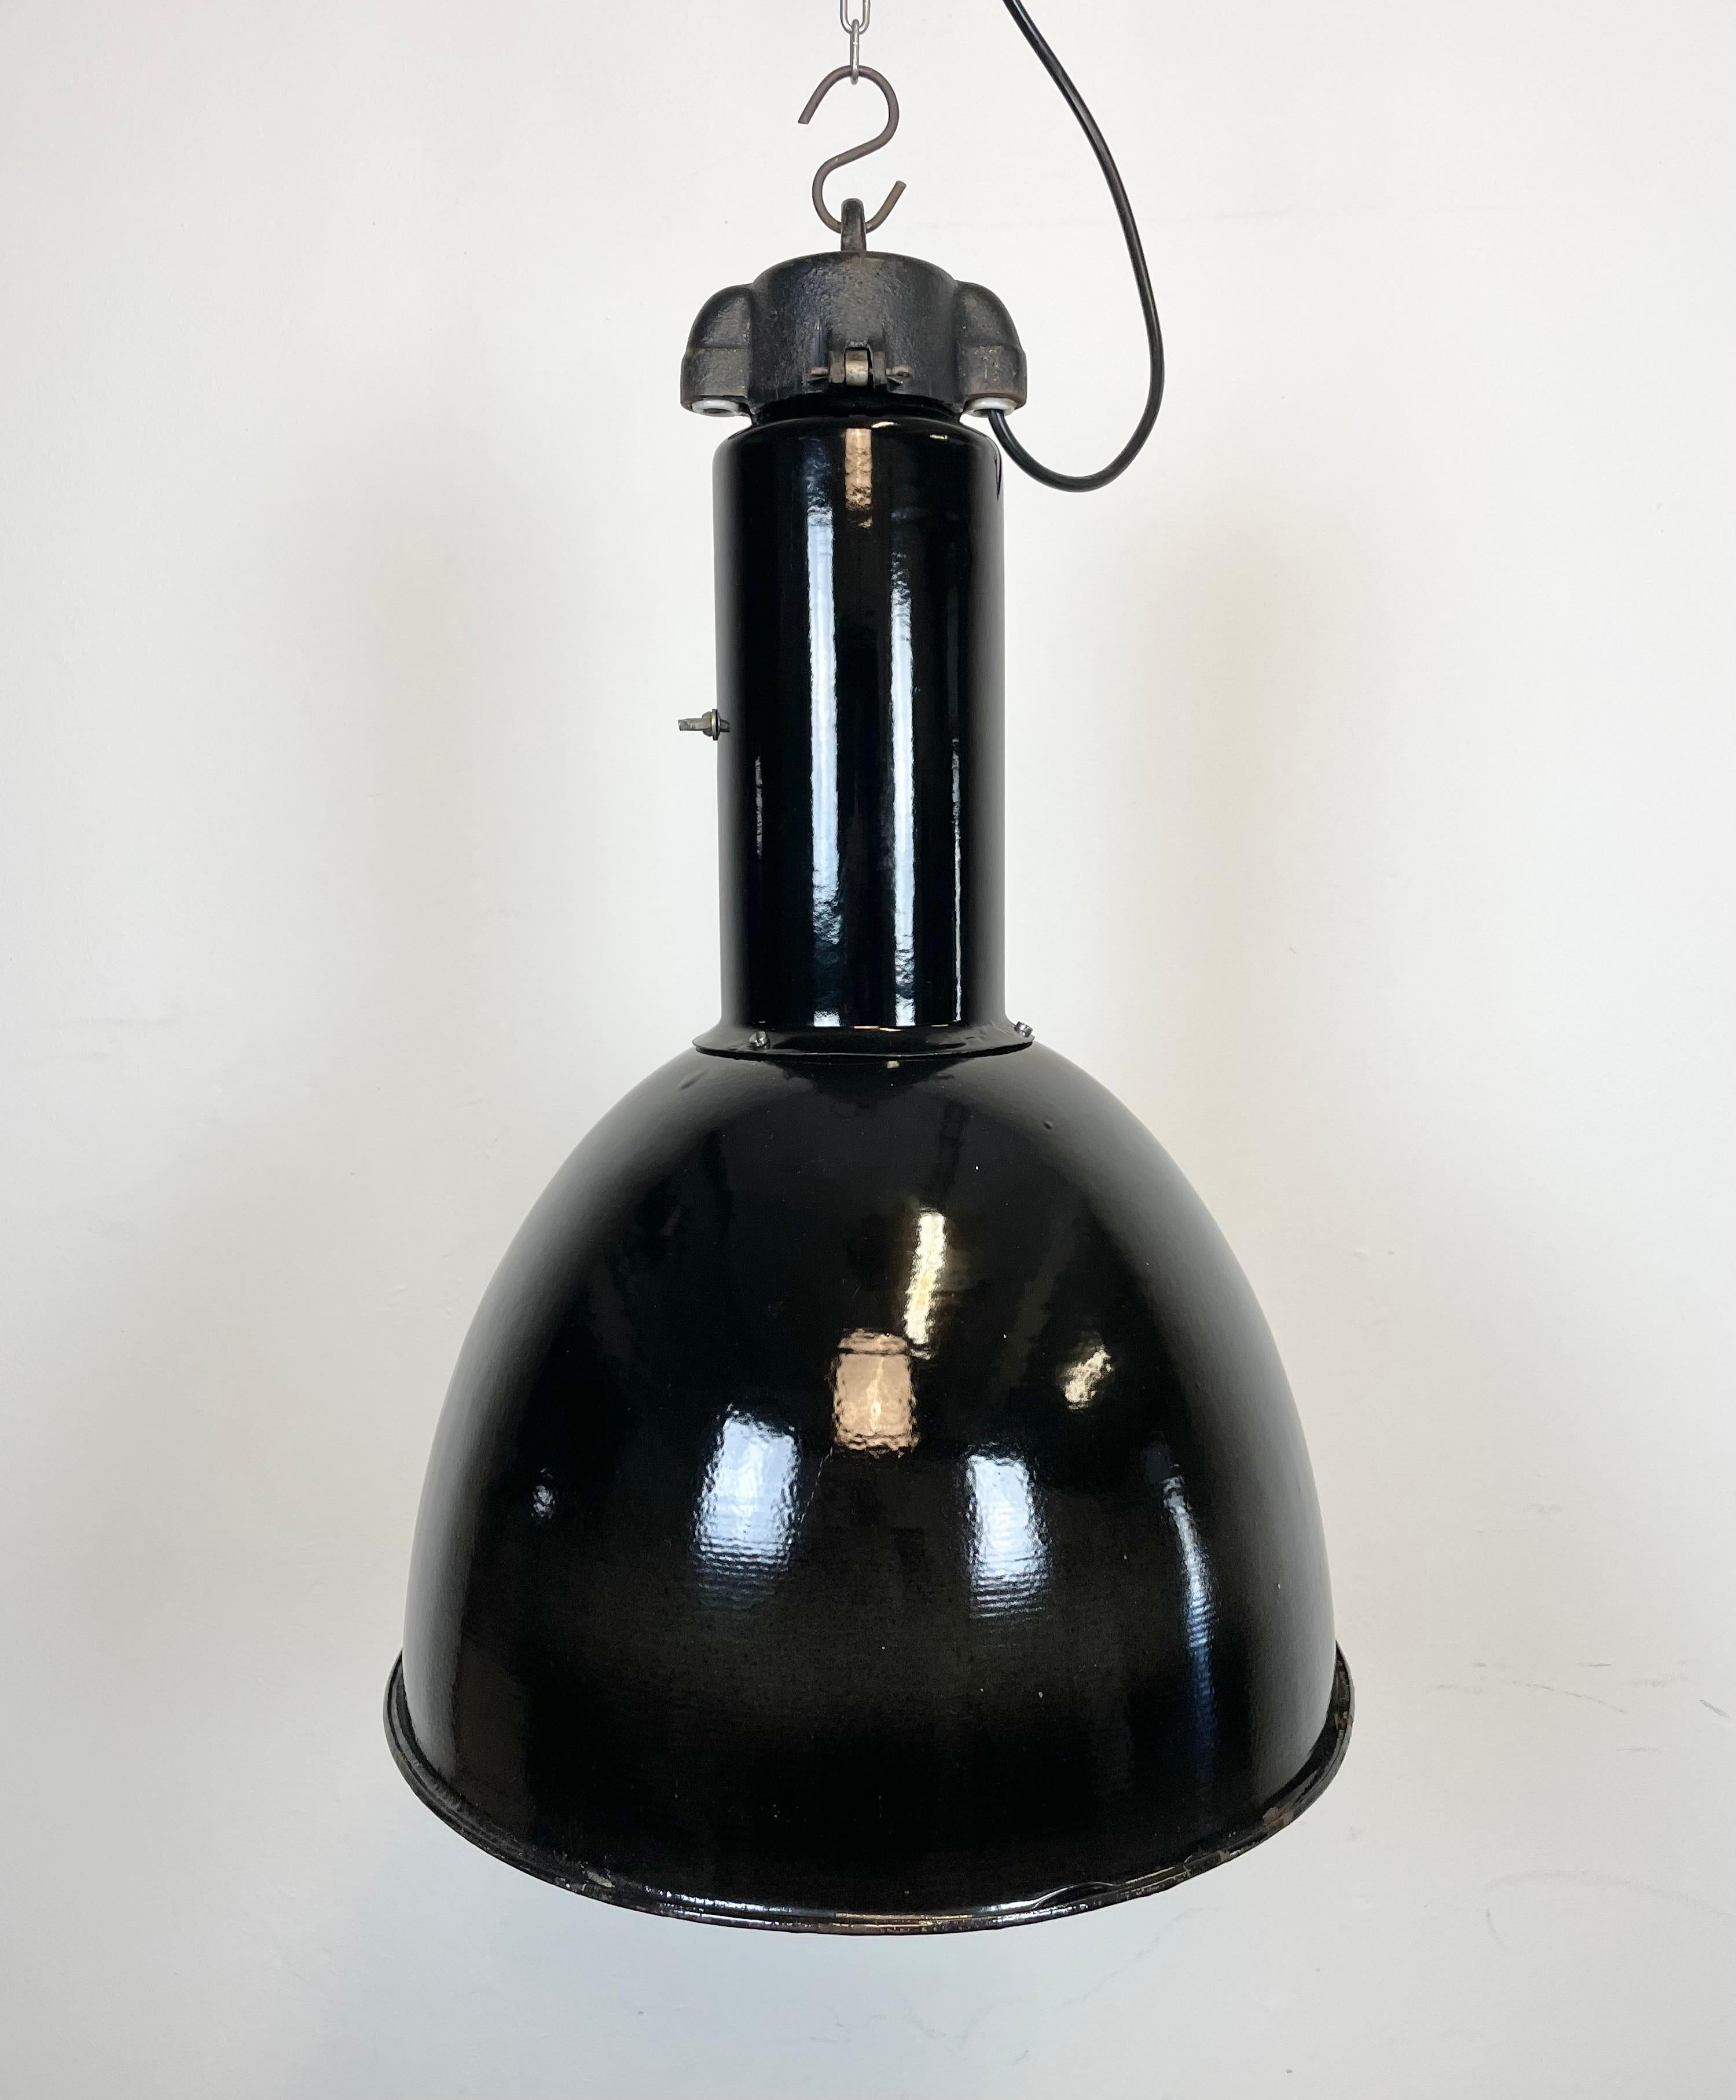 Set of 4 Industrial Bauhaus Black Enamel Pendant Lamps, 1960s In Good Condition For Sale In Kojetice, CZ